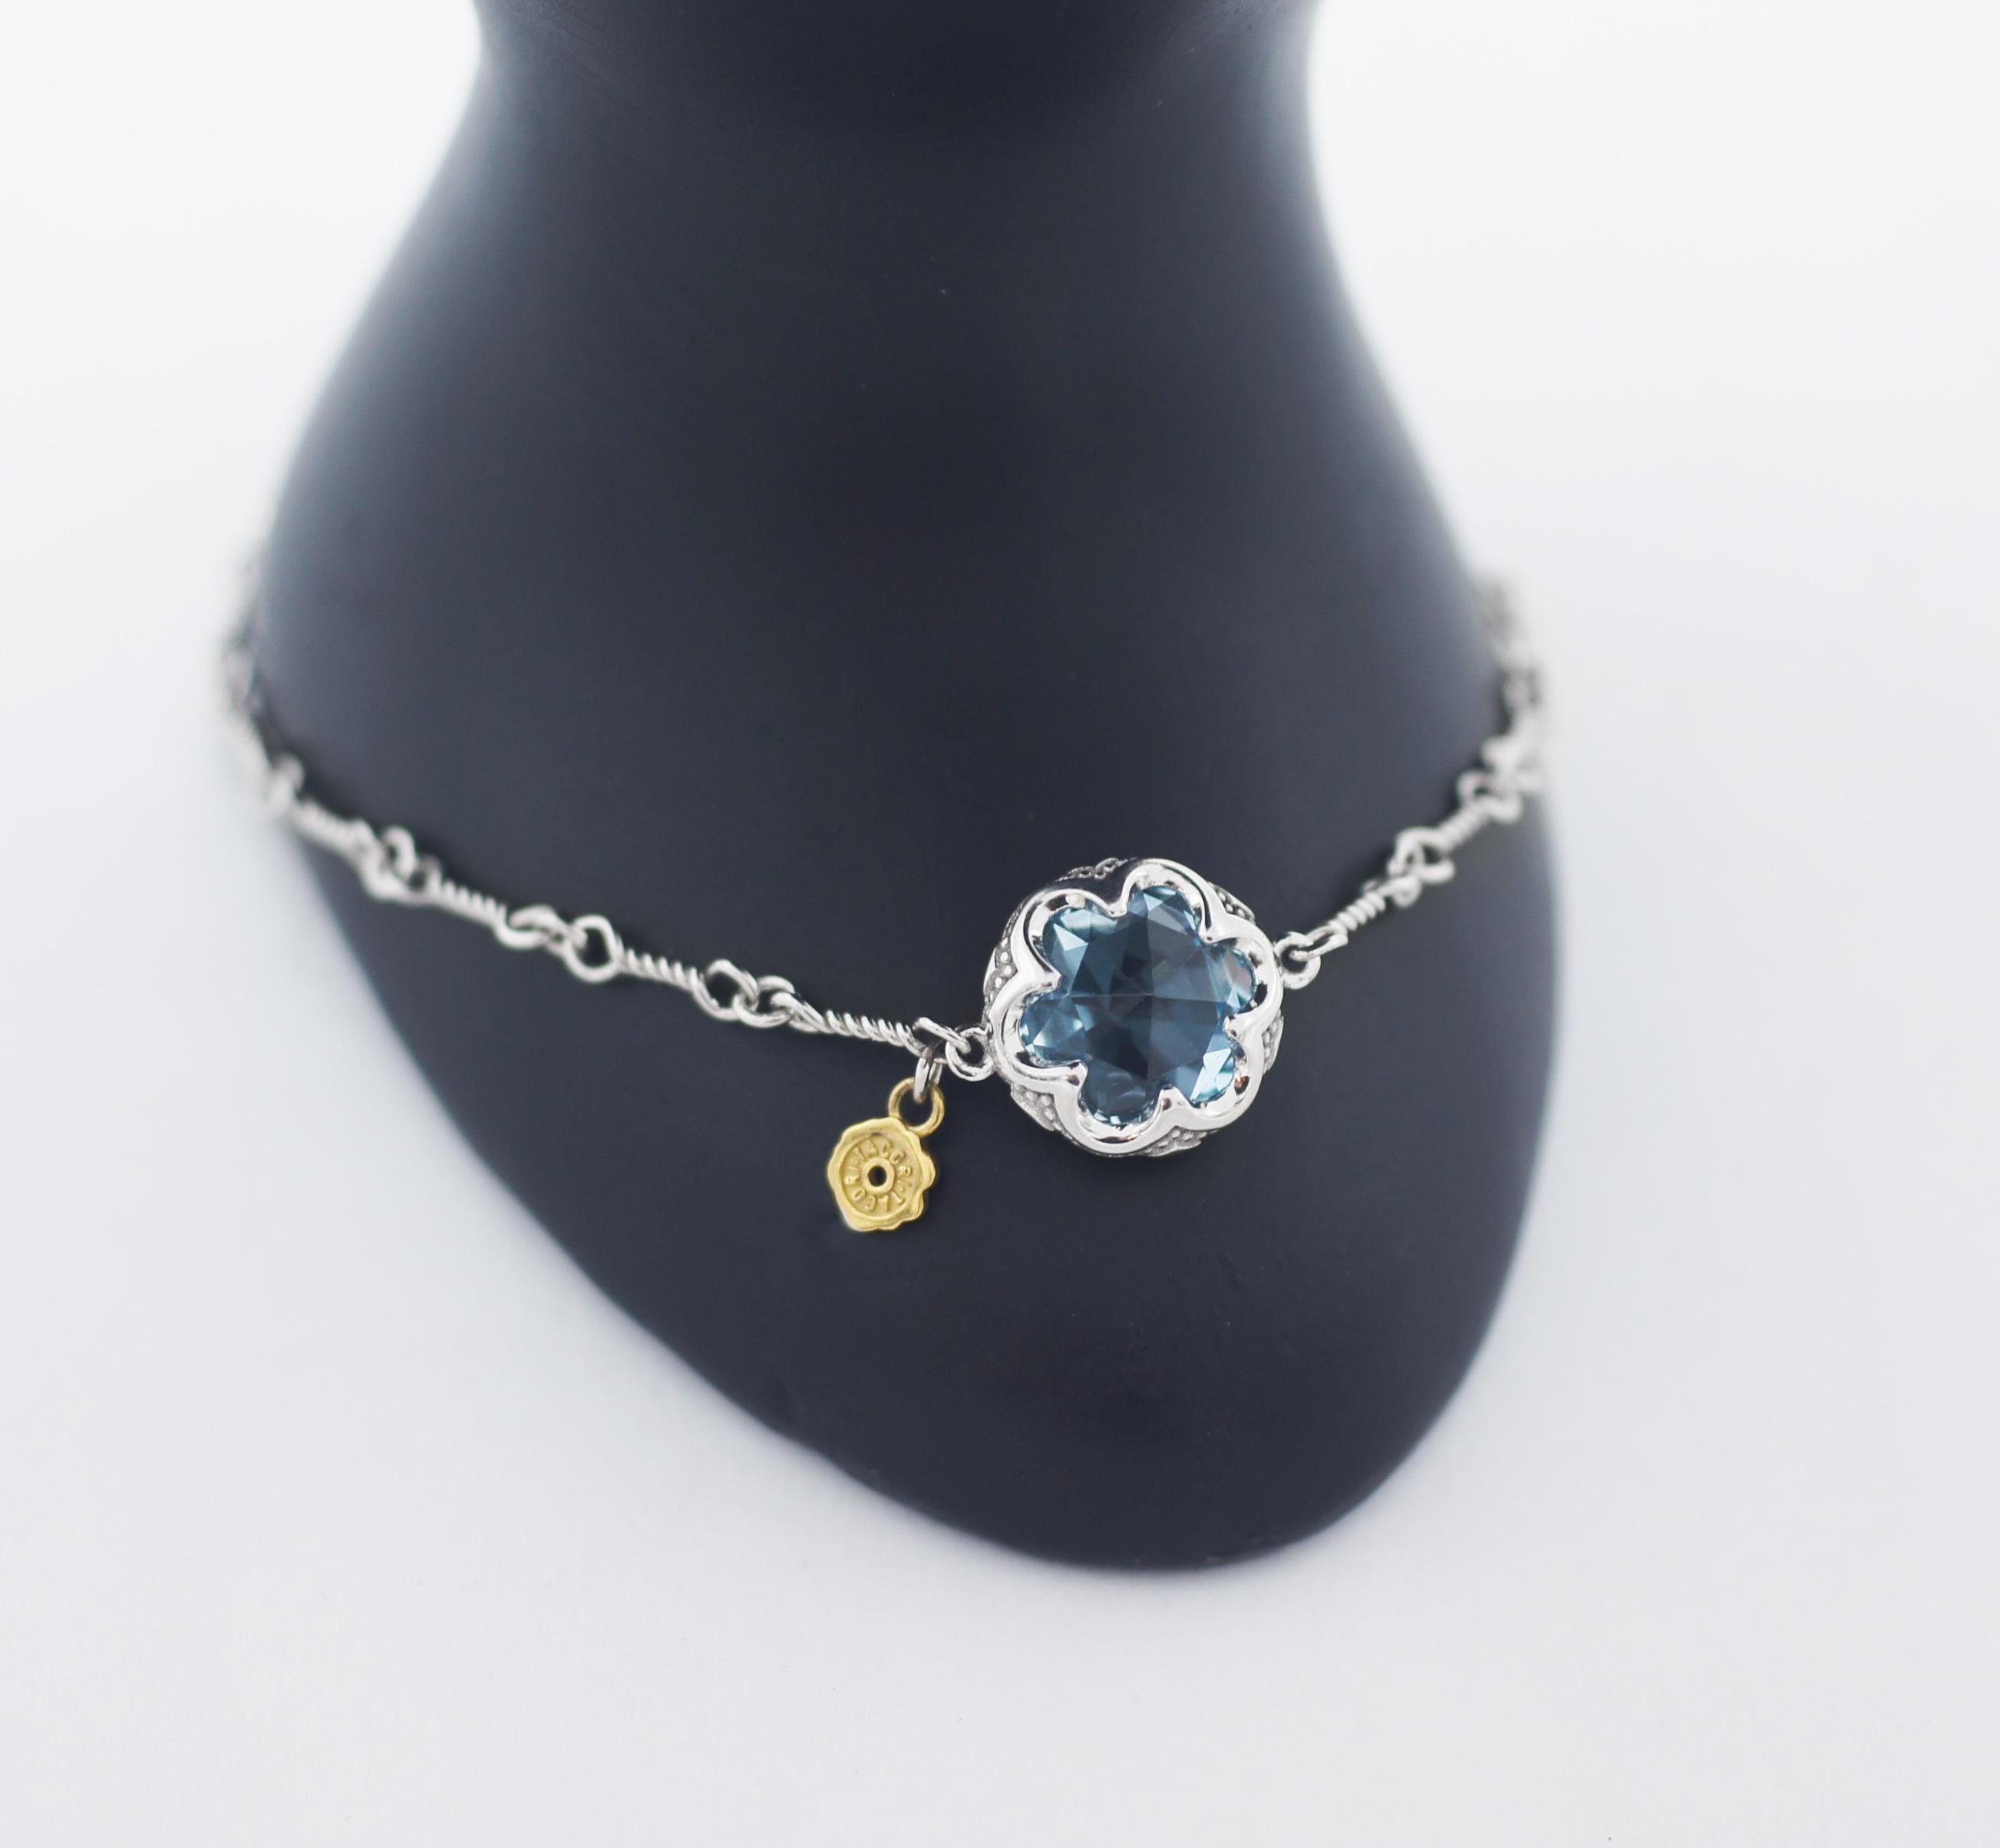 TACORI
925 Silver / 18K
Sonoma Skies
Crescent Gemstone Bracelet featuring Sky Blue Topaz
Tacori STYLE SB19802
Sonoma Skies Collection, this bracelet is surely something to behold. 
A beautiful Sky Blue Topaz gemstone sits delicately within a floral